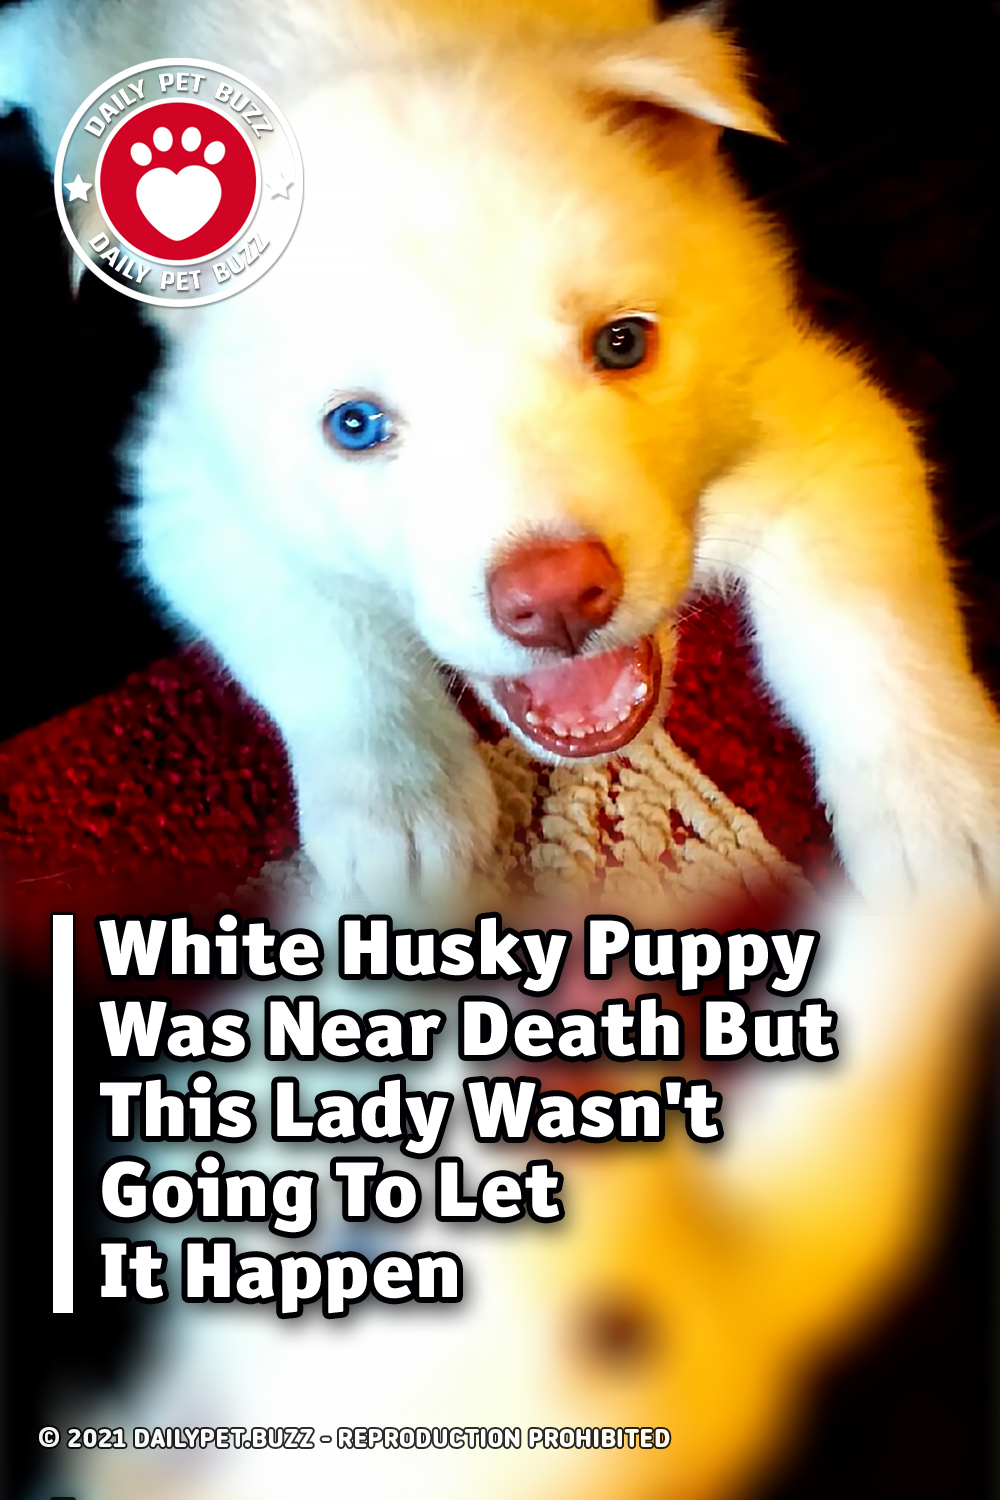 White Husky Puppy Was Near Death But This Lady Wasn\'t Going To Let It Happen